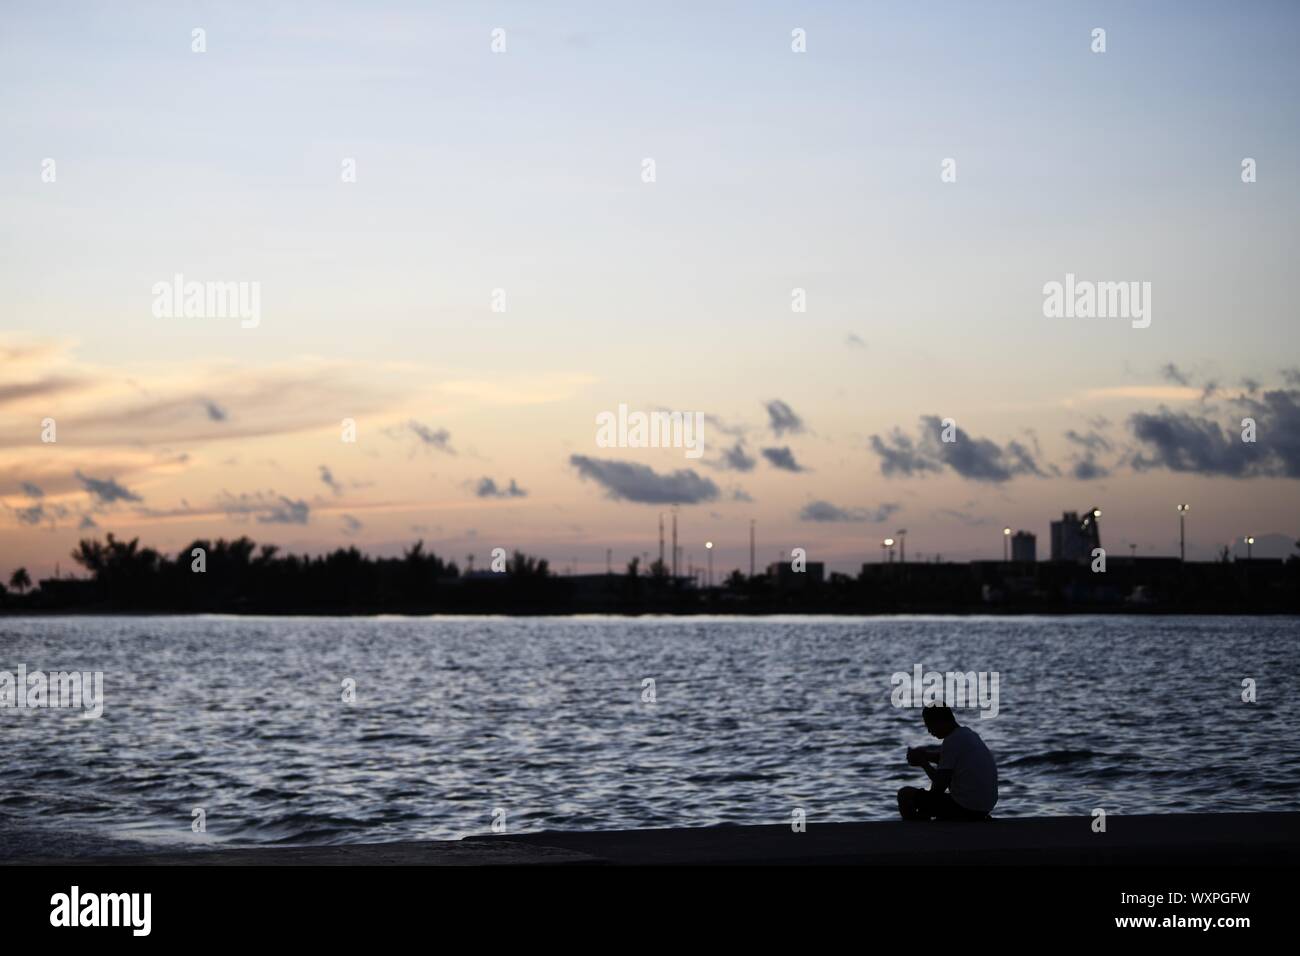 Nassau, Bahamas. 16th Sep, 2019. A man enjoys sunset on the beach days after Hurricane Dorian swept Nassau, capital of Bahamas, Sept. 16, 2019. Hurricane Dorian, a Category 5 storm, made a landfall on Elbow Cay in Abaco Islands in the Bahamas on Sept. 1. According to media reports, the list of missing as a result of Hurricane Dorian stands at an alarming 1,300 people and the death toll at 50. Credit: Xin Yuewei/Xinhua/Alamy Live News Stock Photo